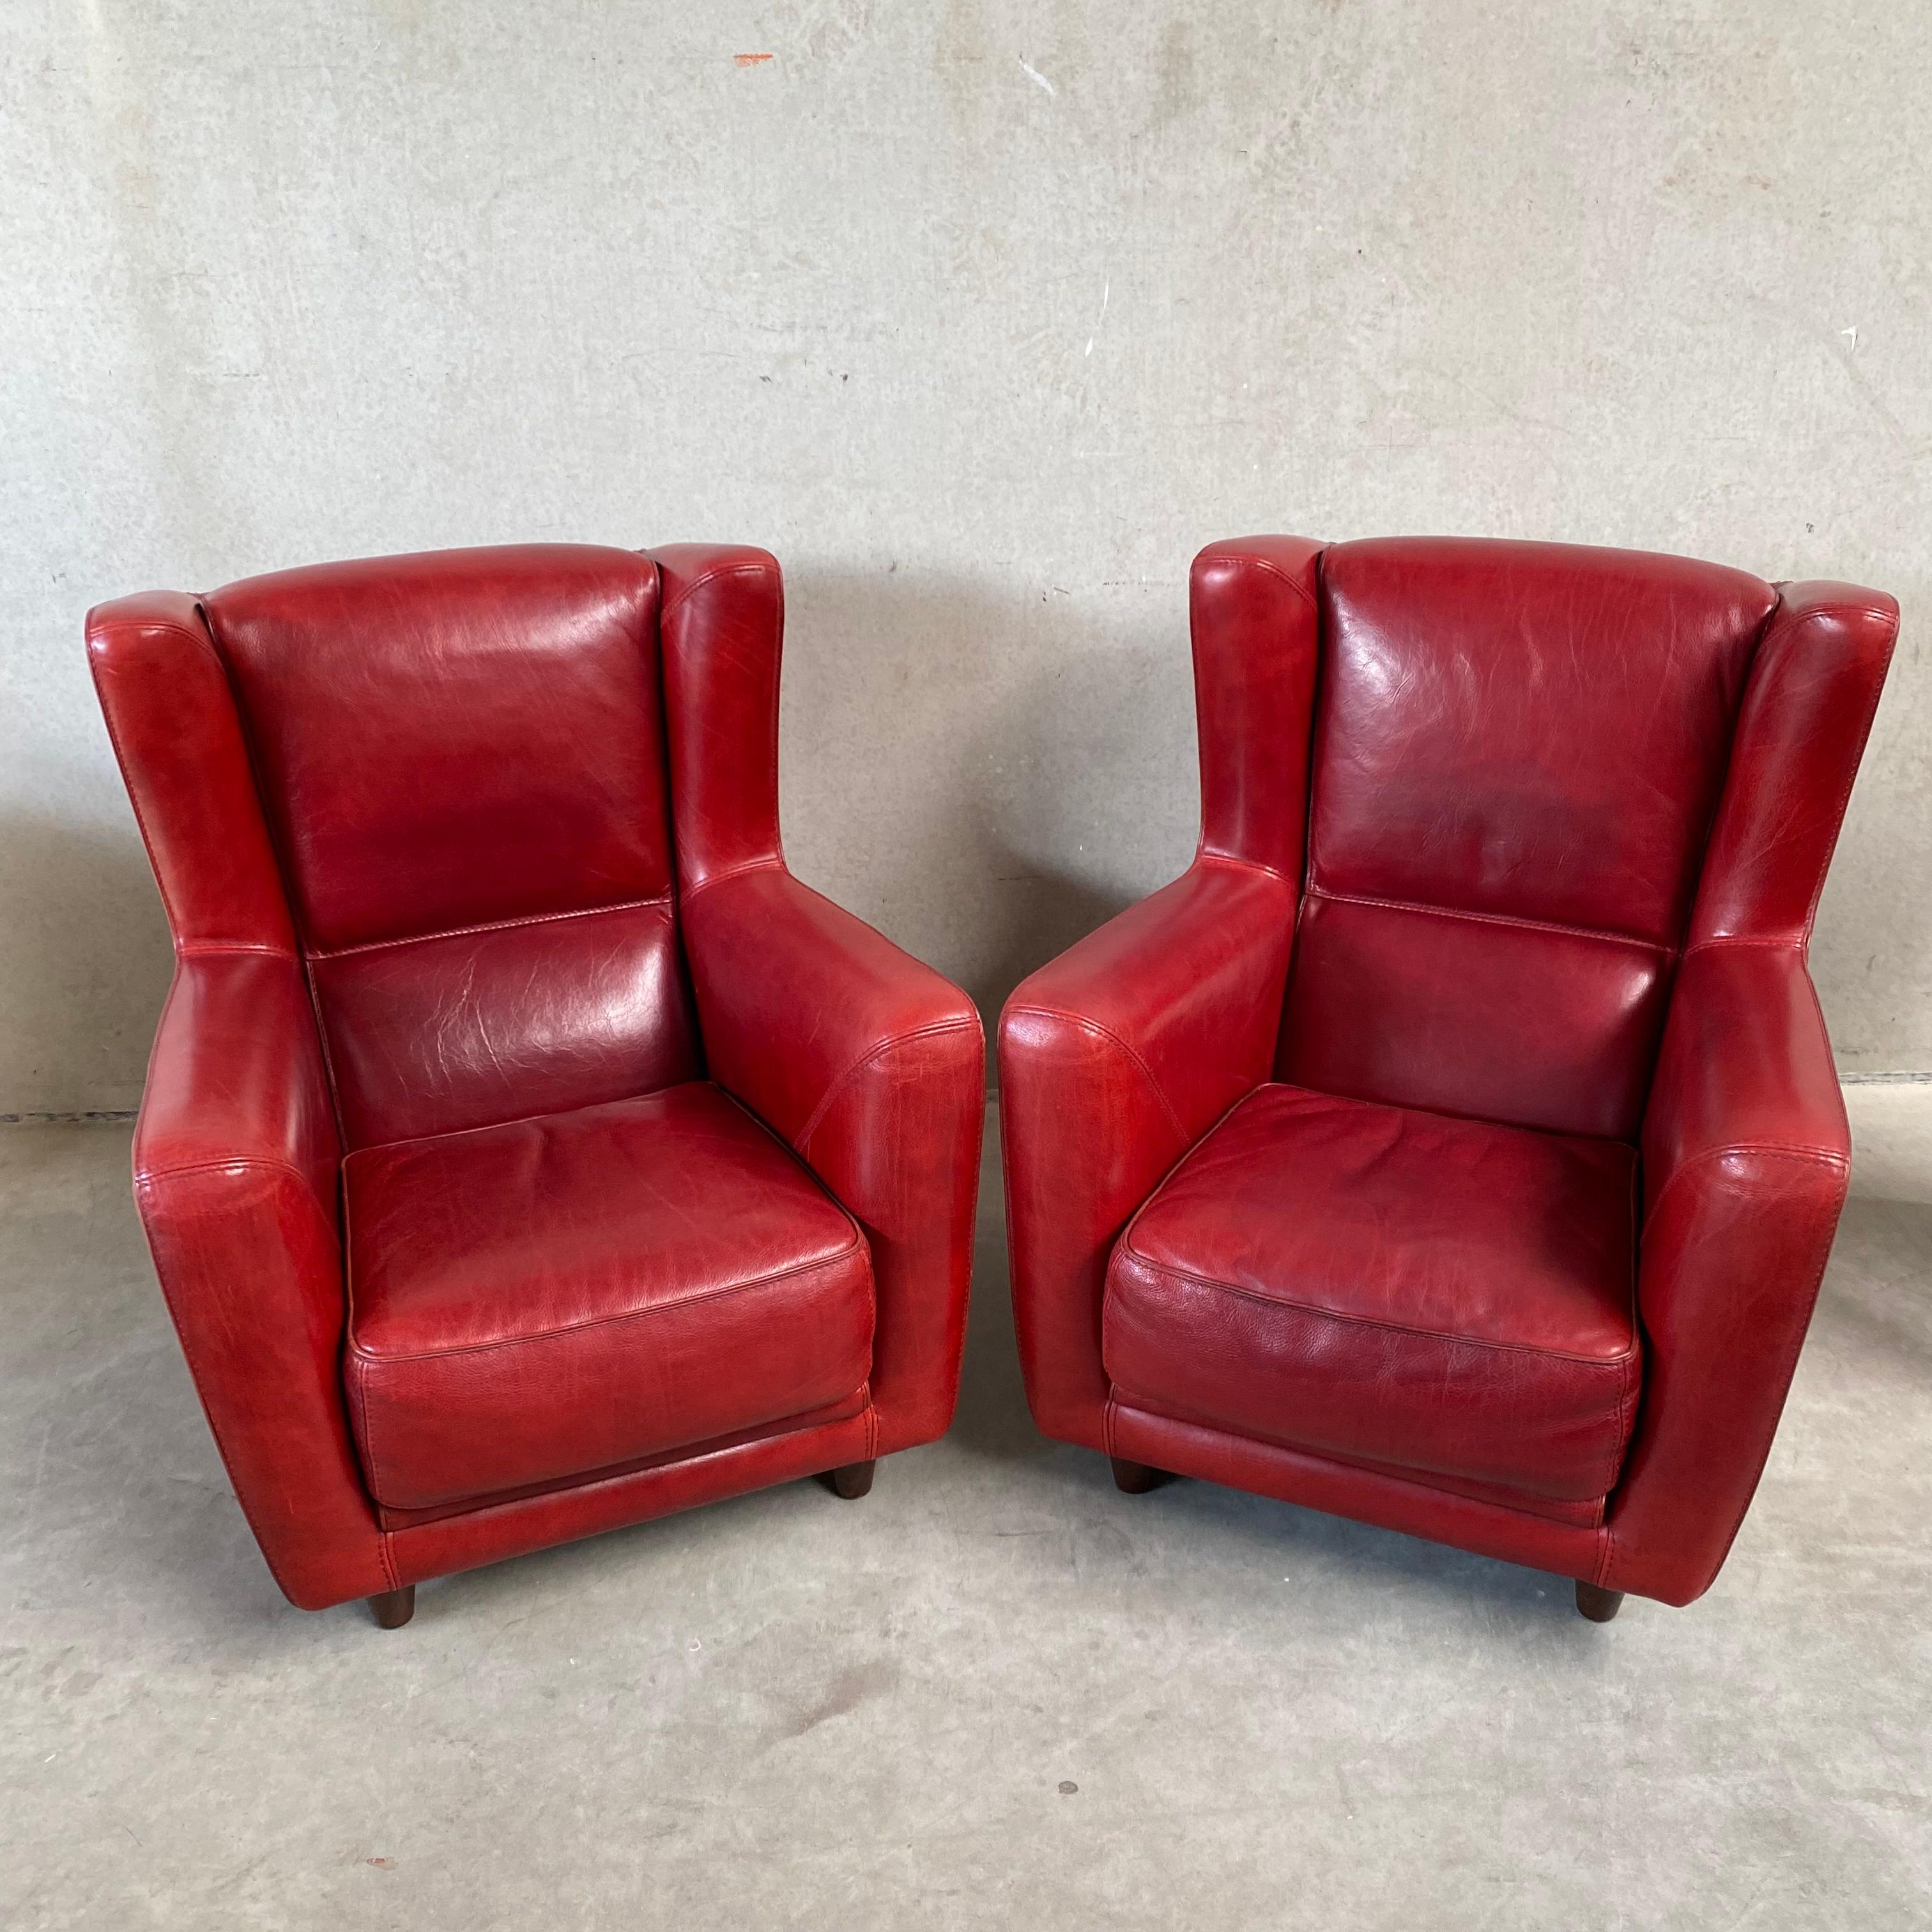 Pair of Ox-Blood Red Leather Lounge Chairs Begére by Baxter Italy 90s For Sale 6